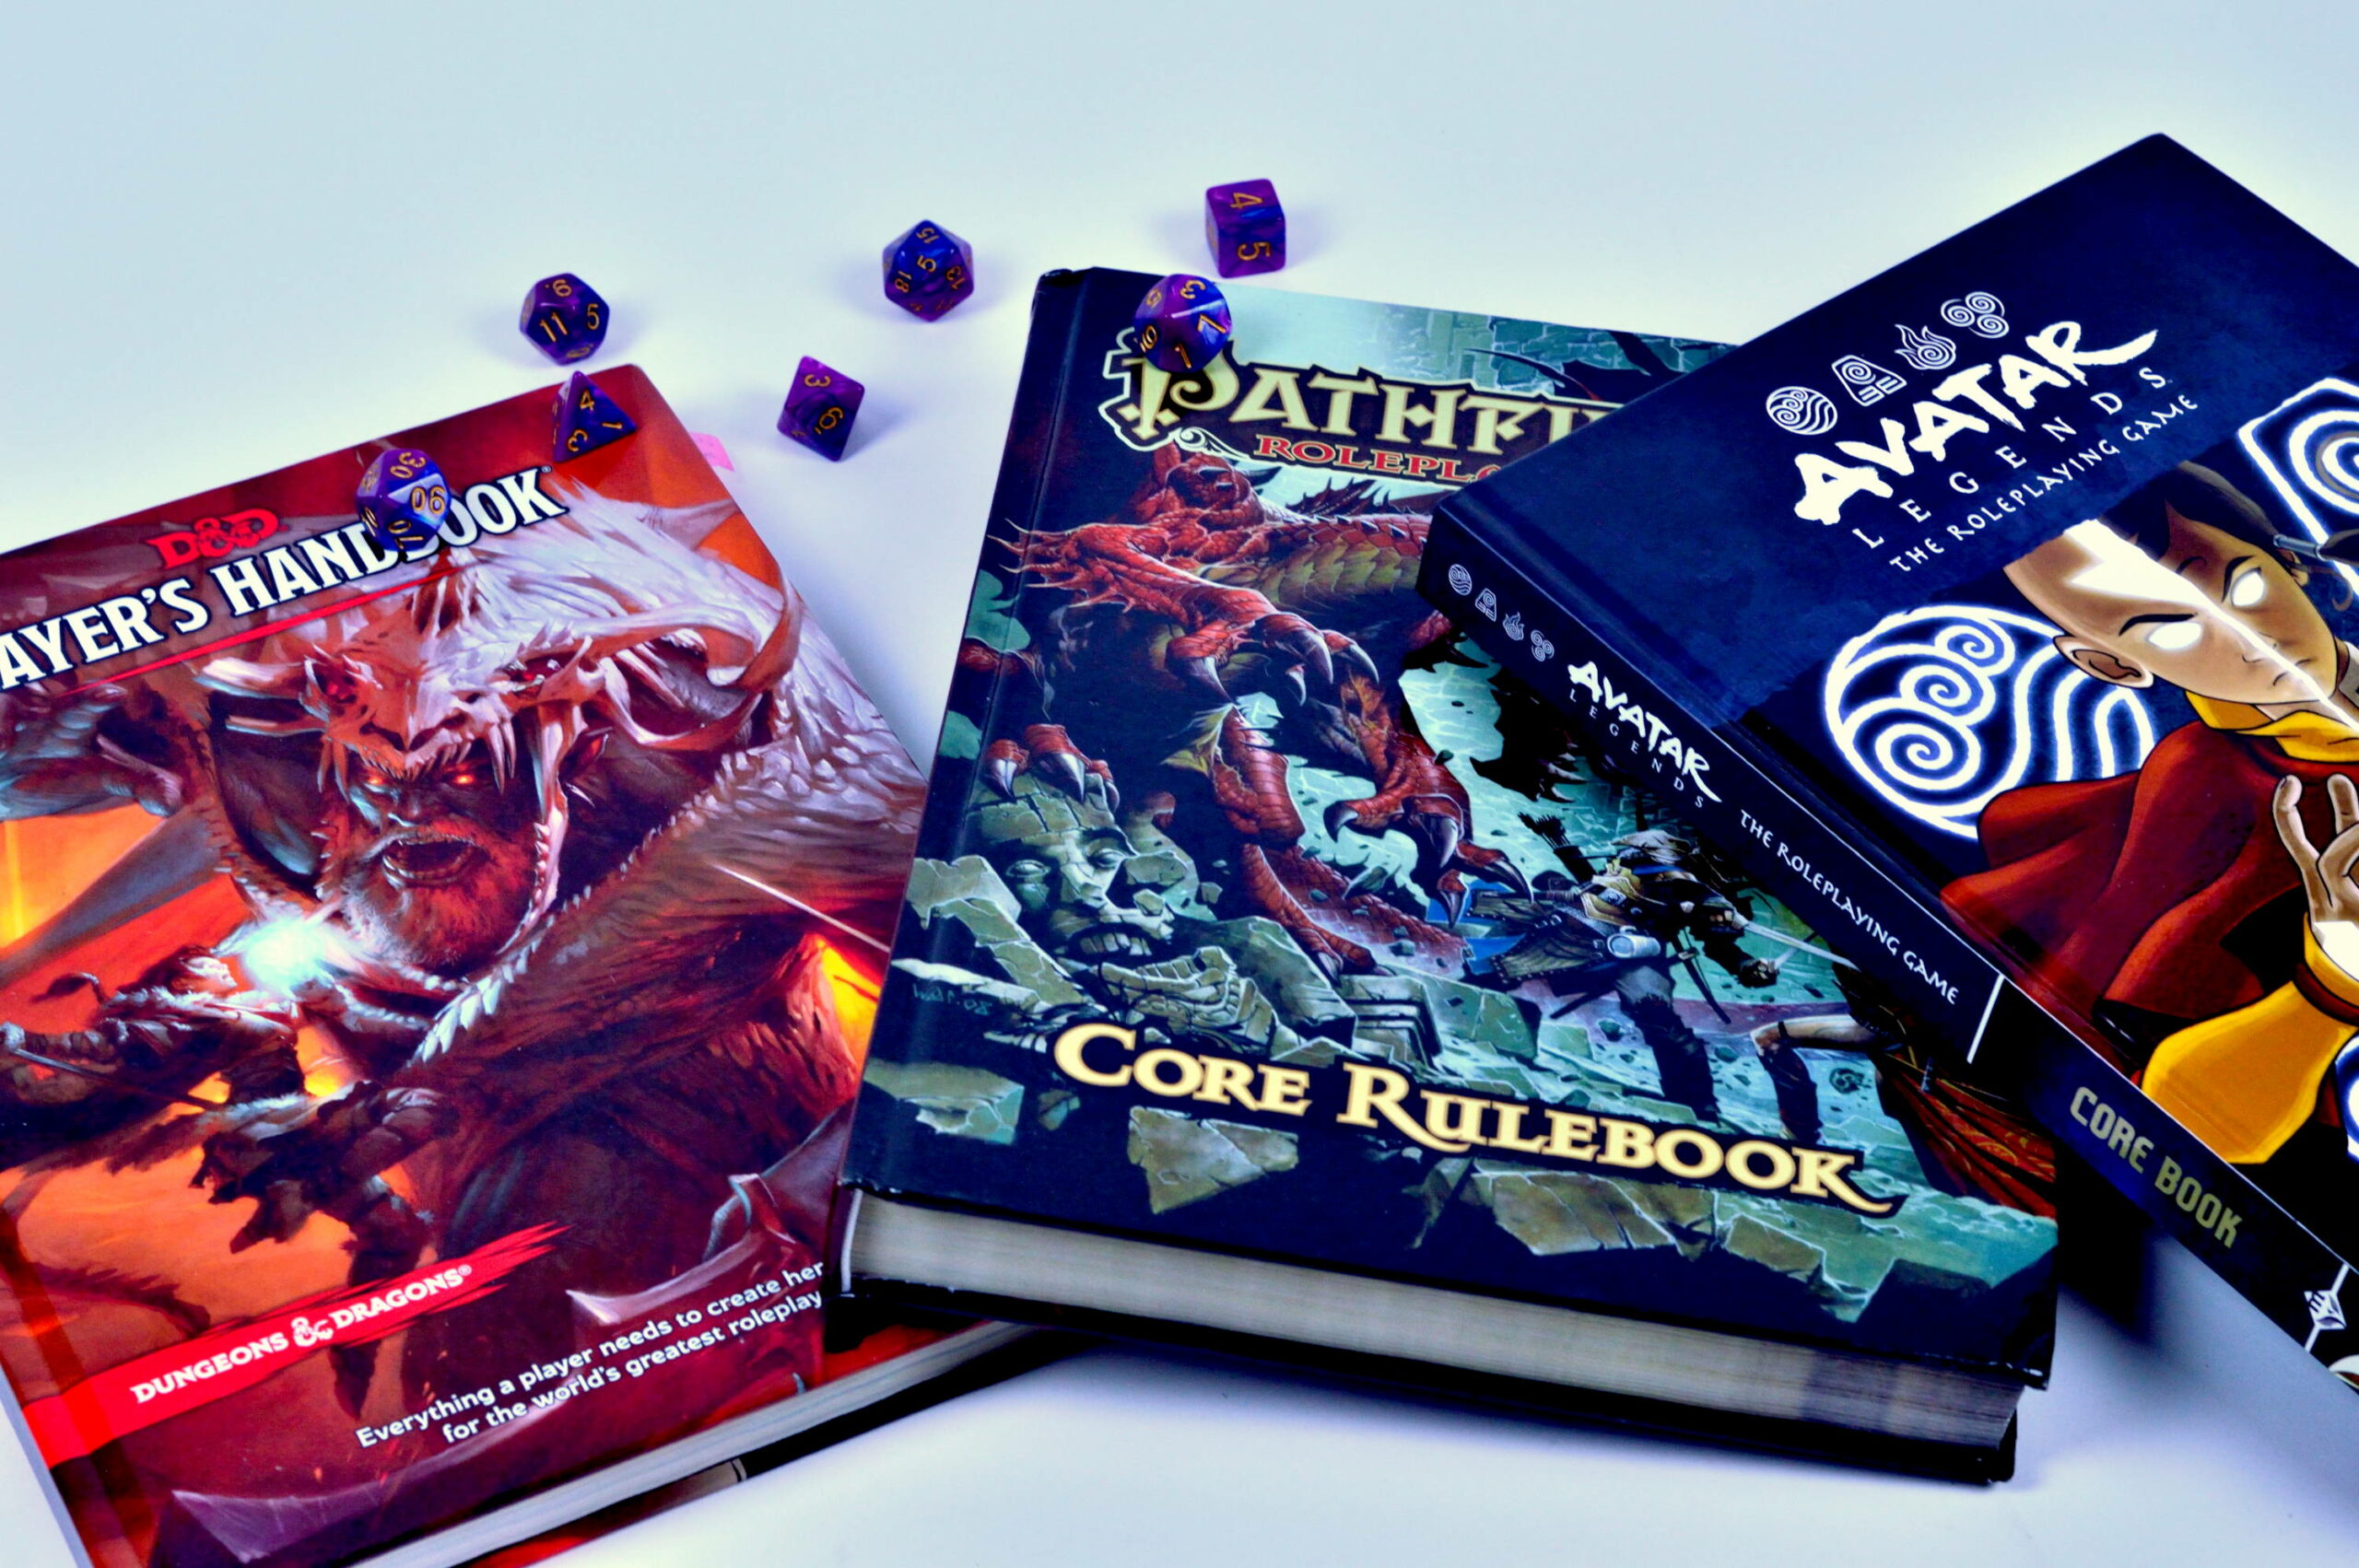 Tabletop Roleplaying Game rulebooks (D&D 5e, Pathfinder 1e, Avatar: The Last Airbender) and some purple dice.